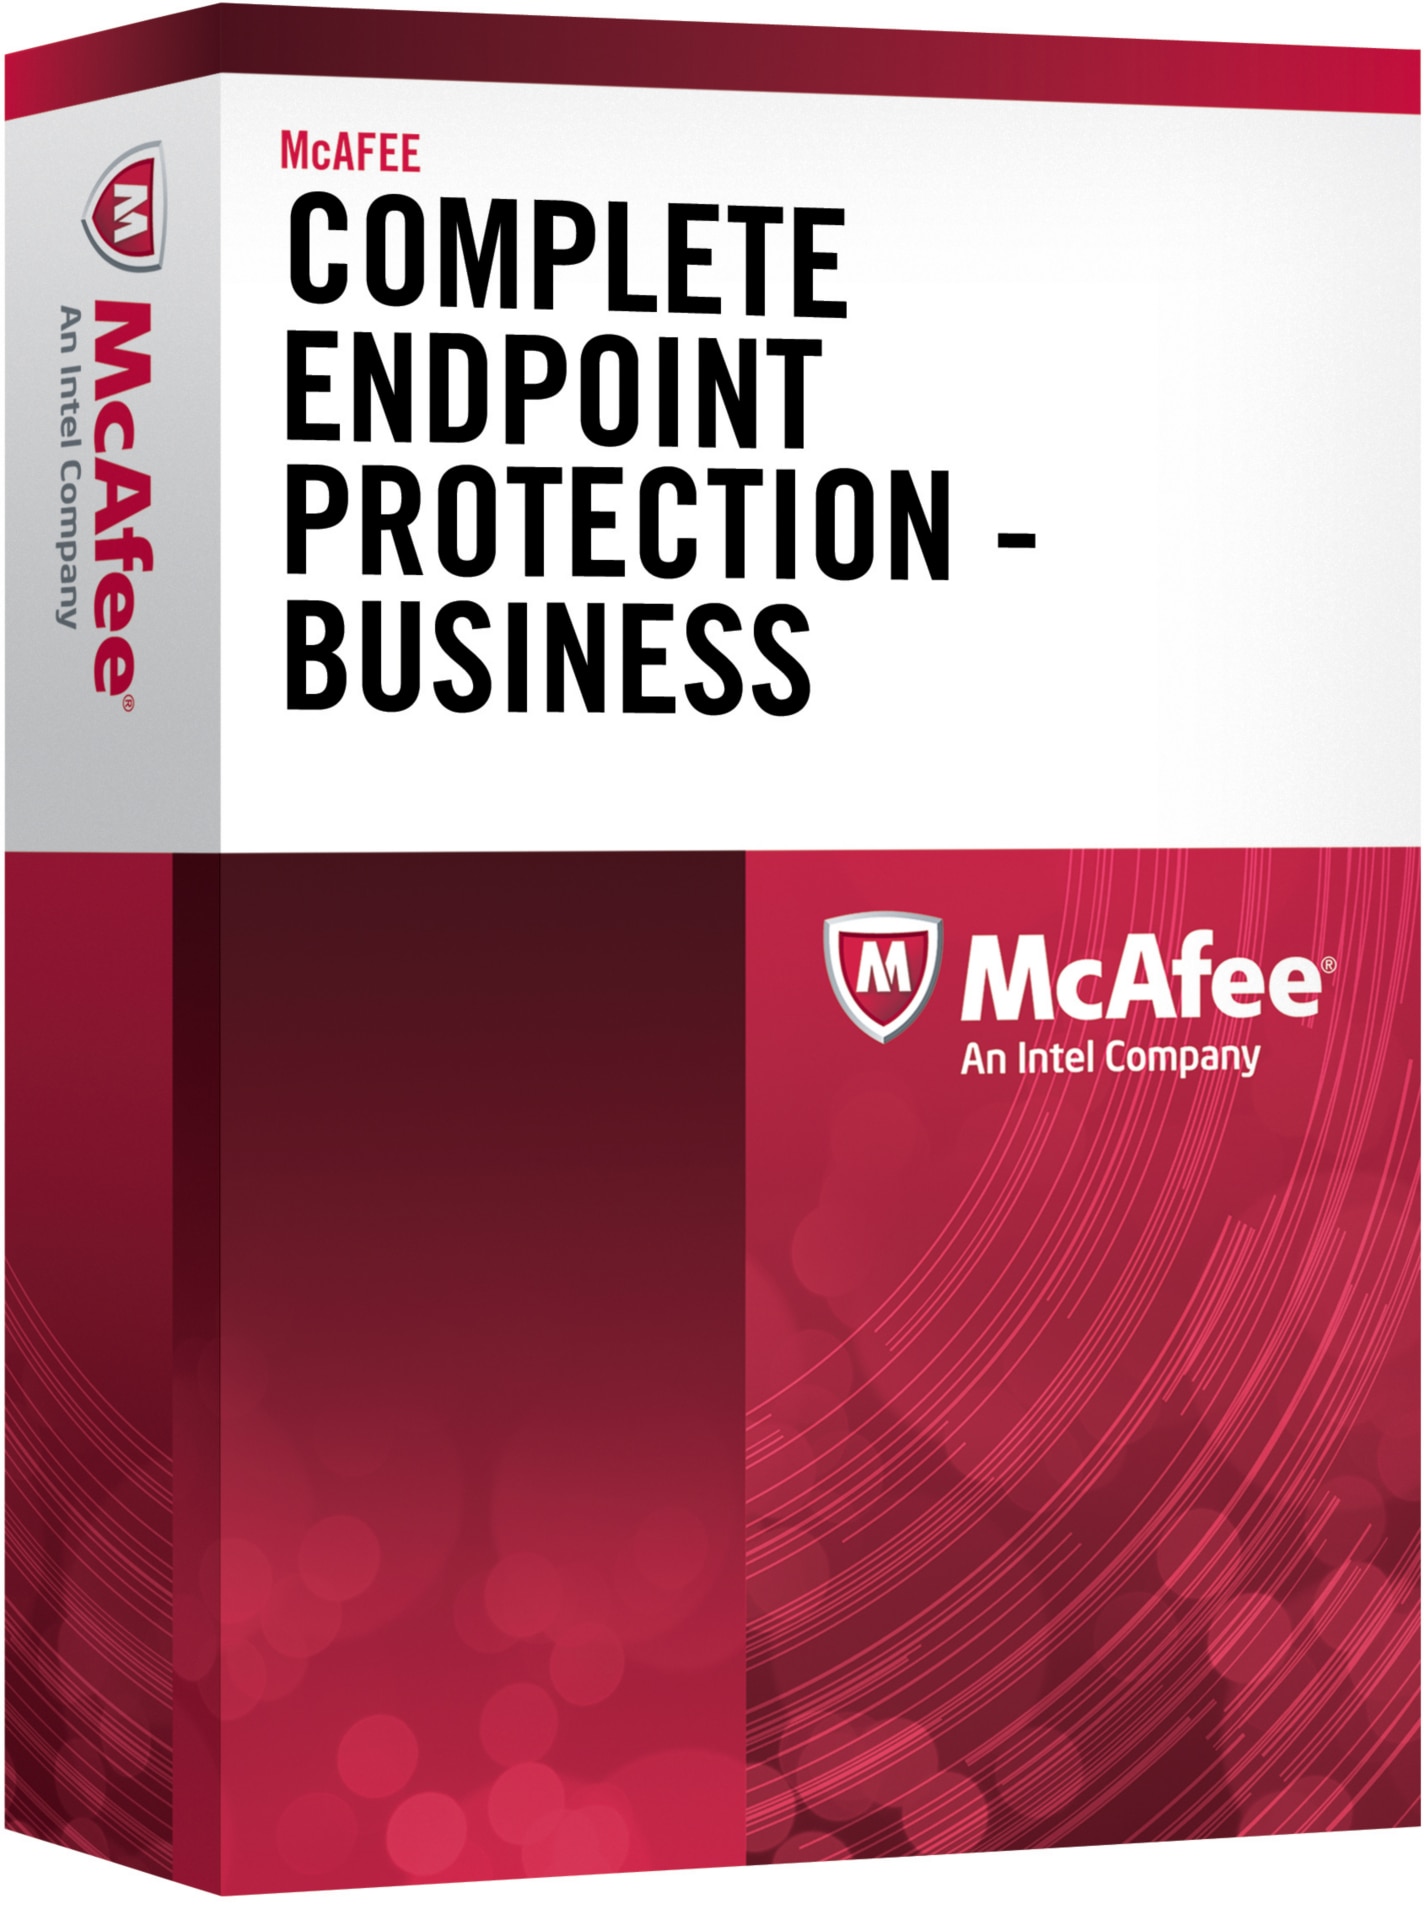 McAfee Complete EndPoint Protection Business - license + 1 Year Gold Busine